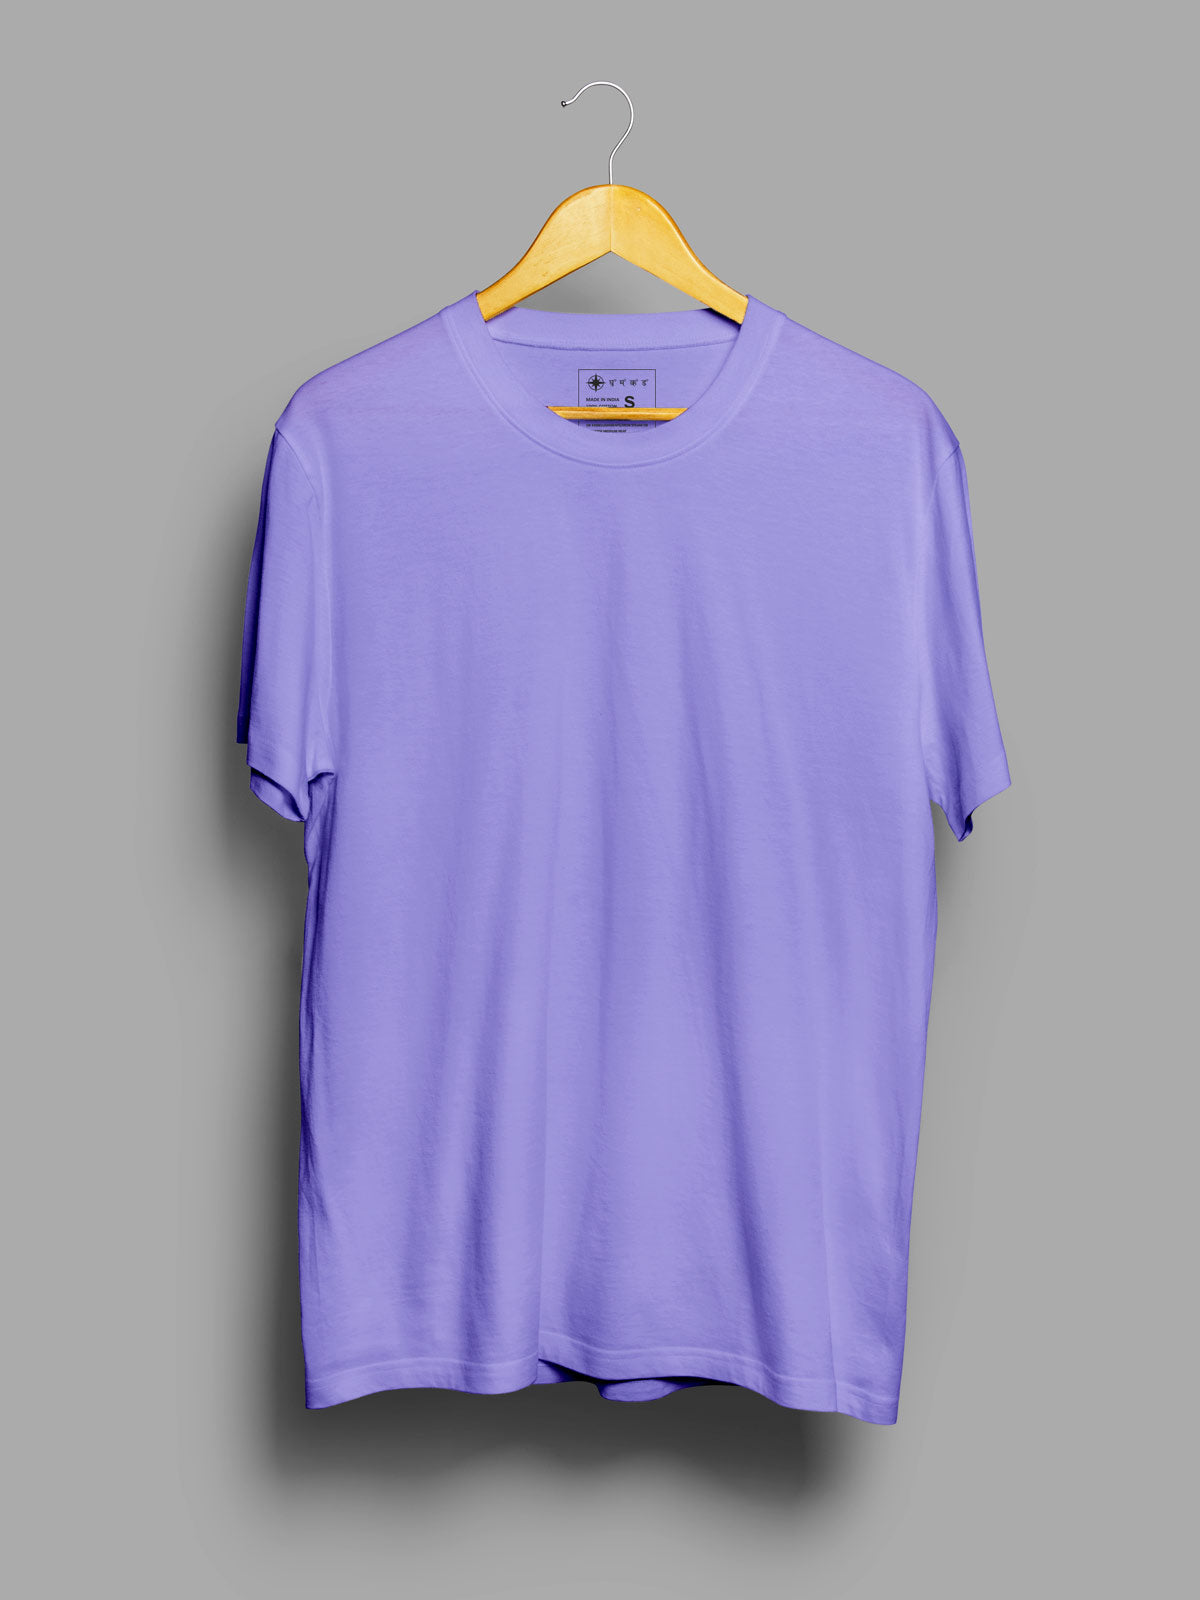 Pack of 3 | White, Teal Blue & Lilac Unisex Plain T shirt